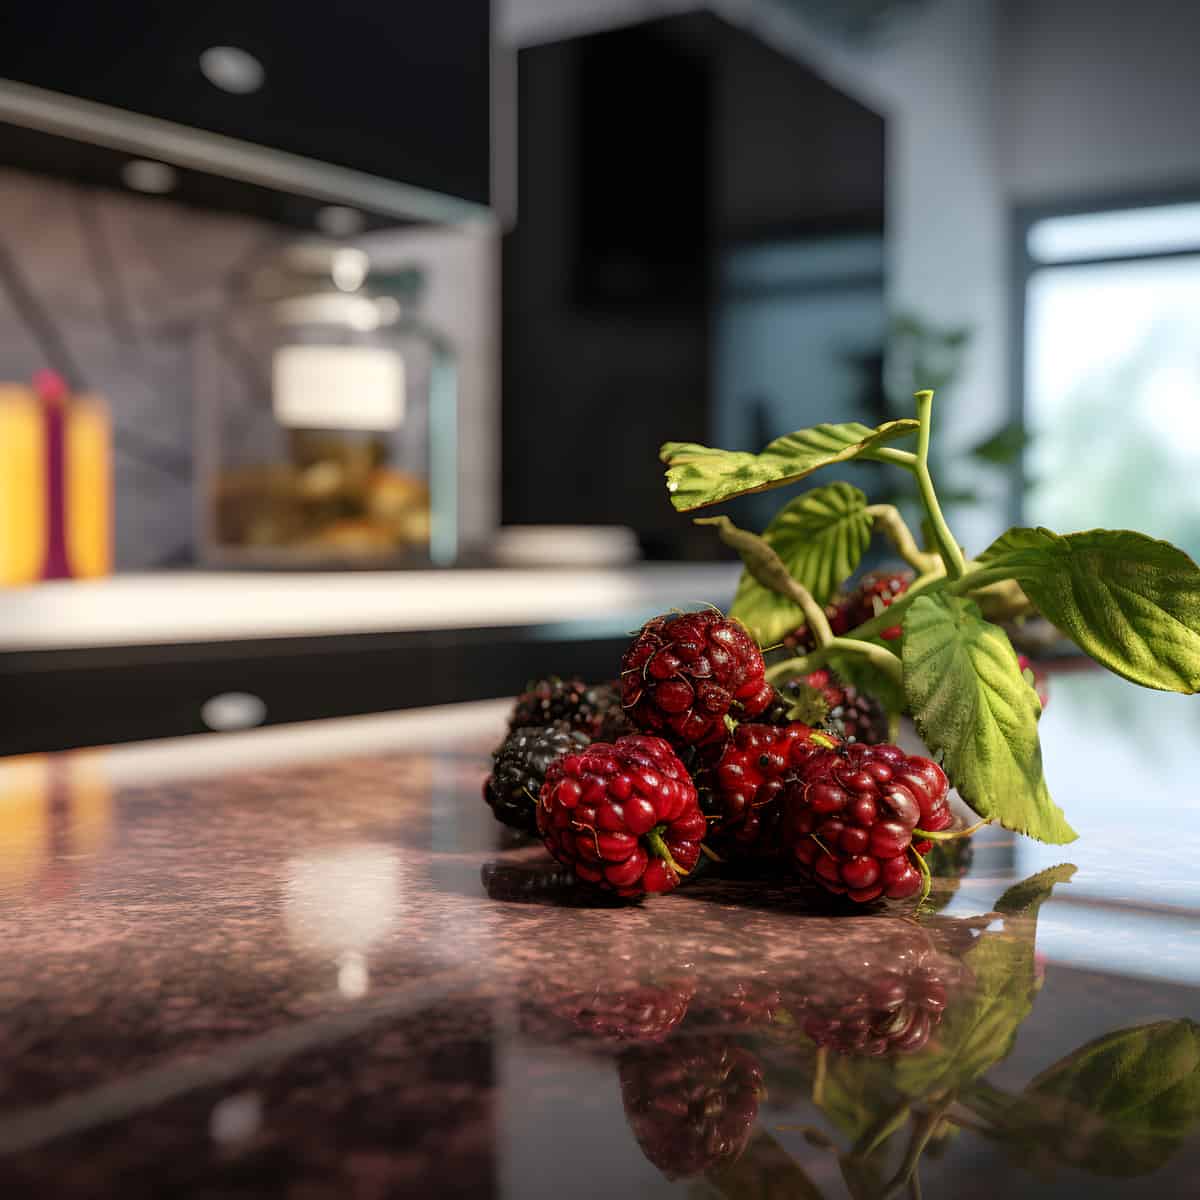 Chinese Bramble Berries on a kitchen counter